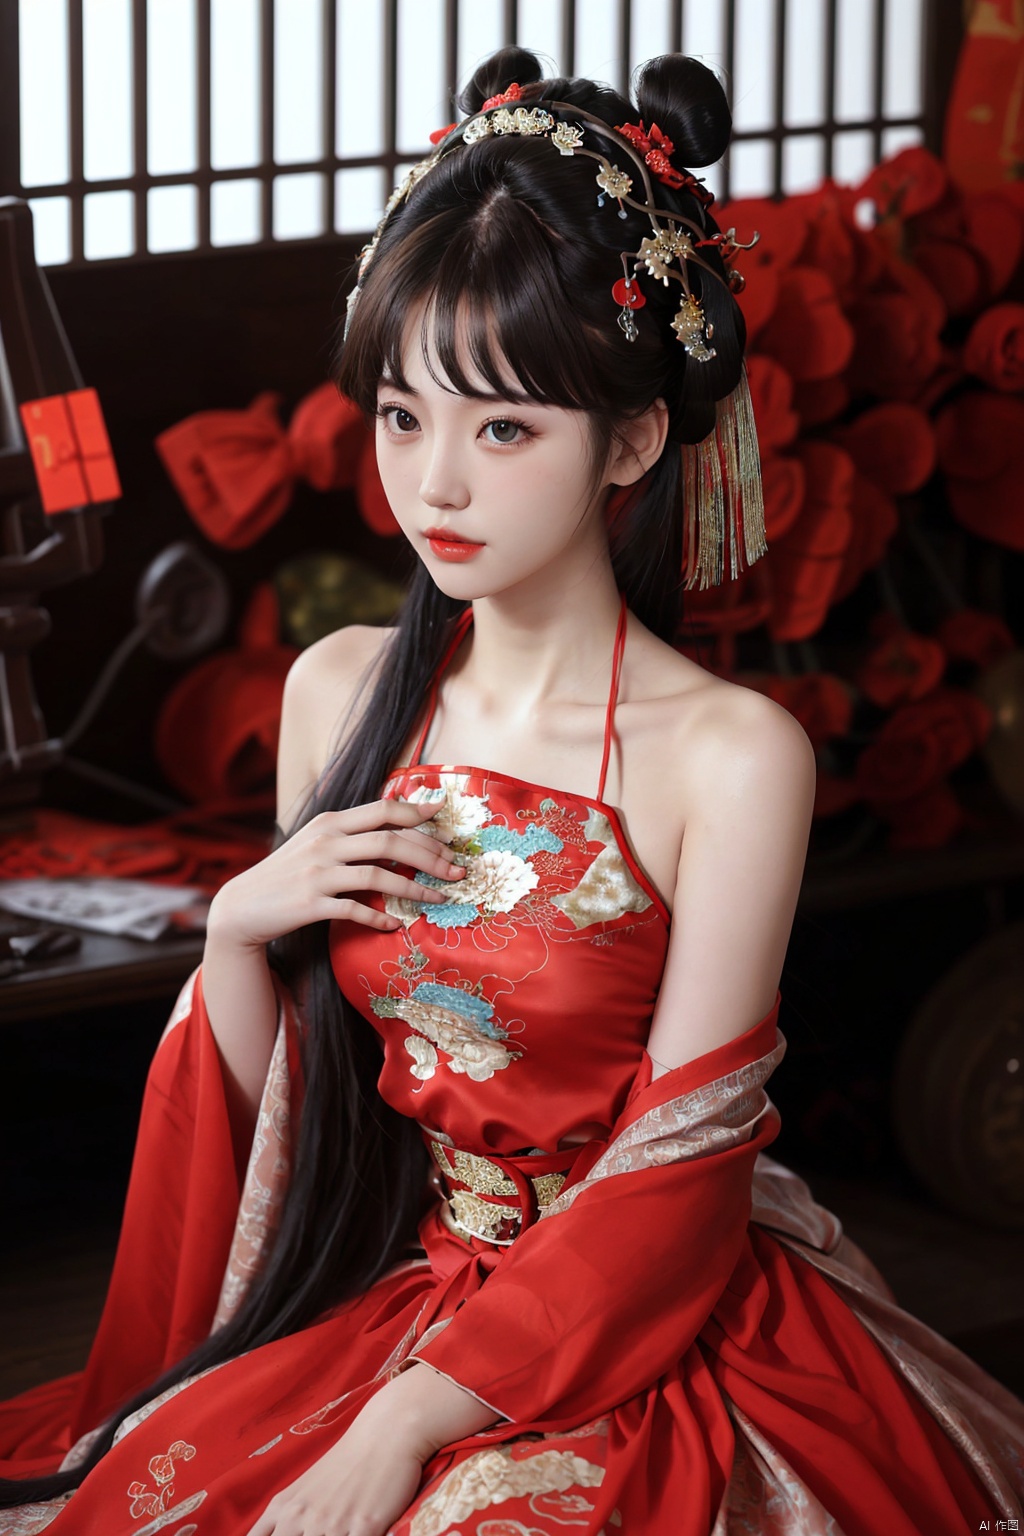  1 girl, dress, hair accessories, red dress, single person, Chinese clothing, long hair, bare shoulders, hair bun,